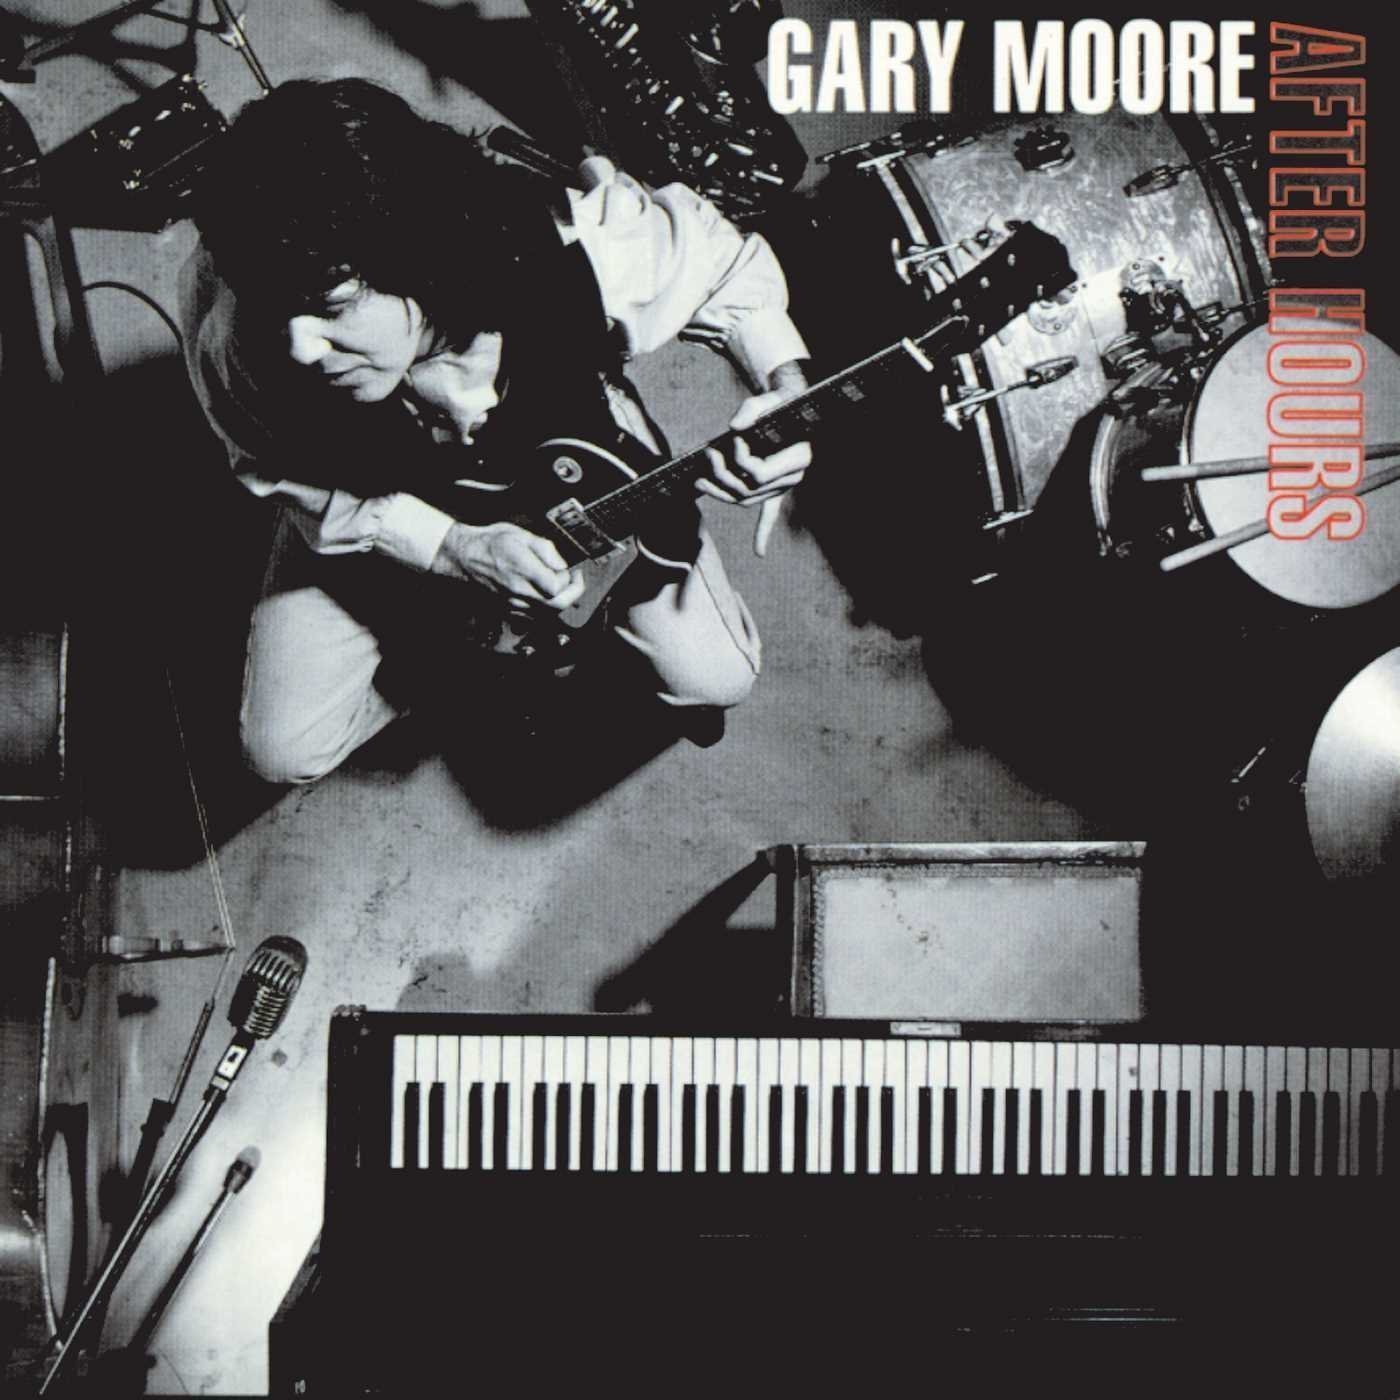 Gary Moore - After Hours (LP)